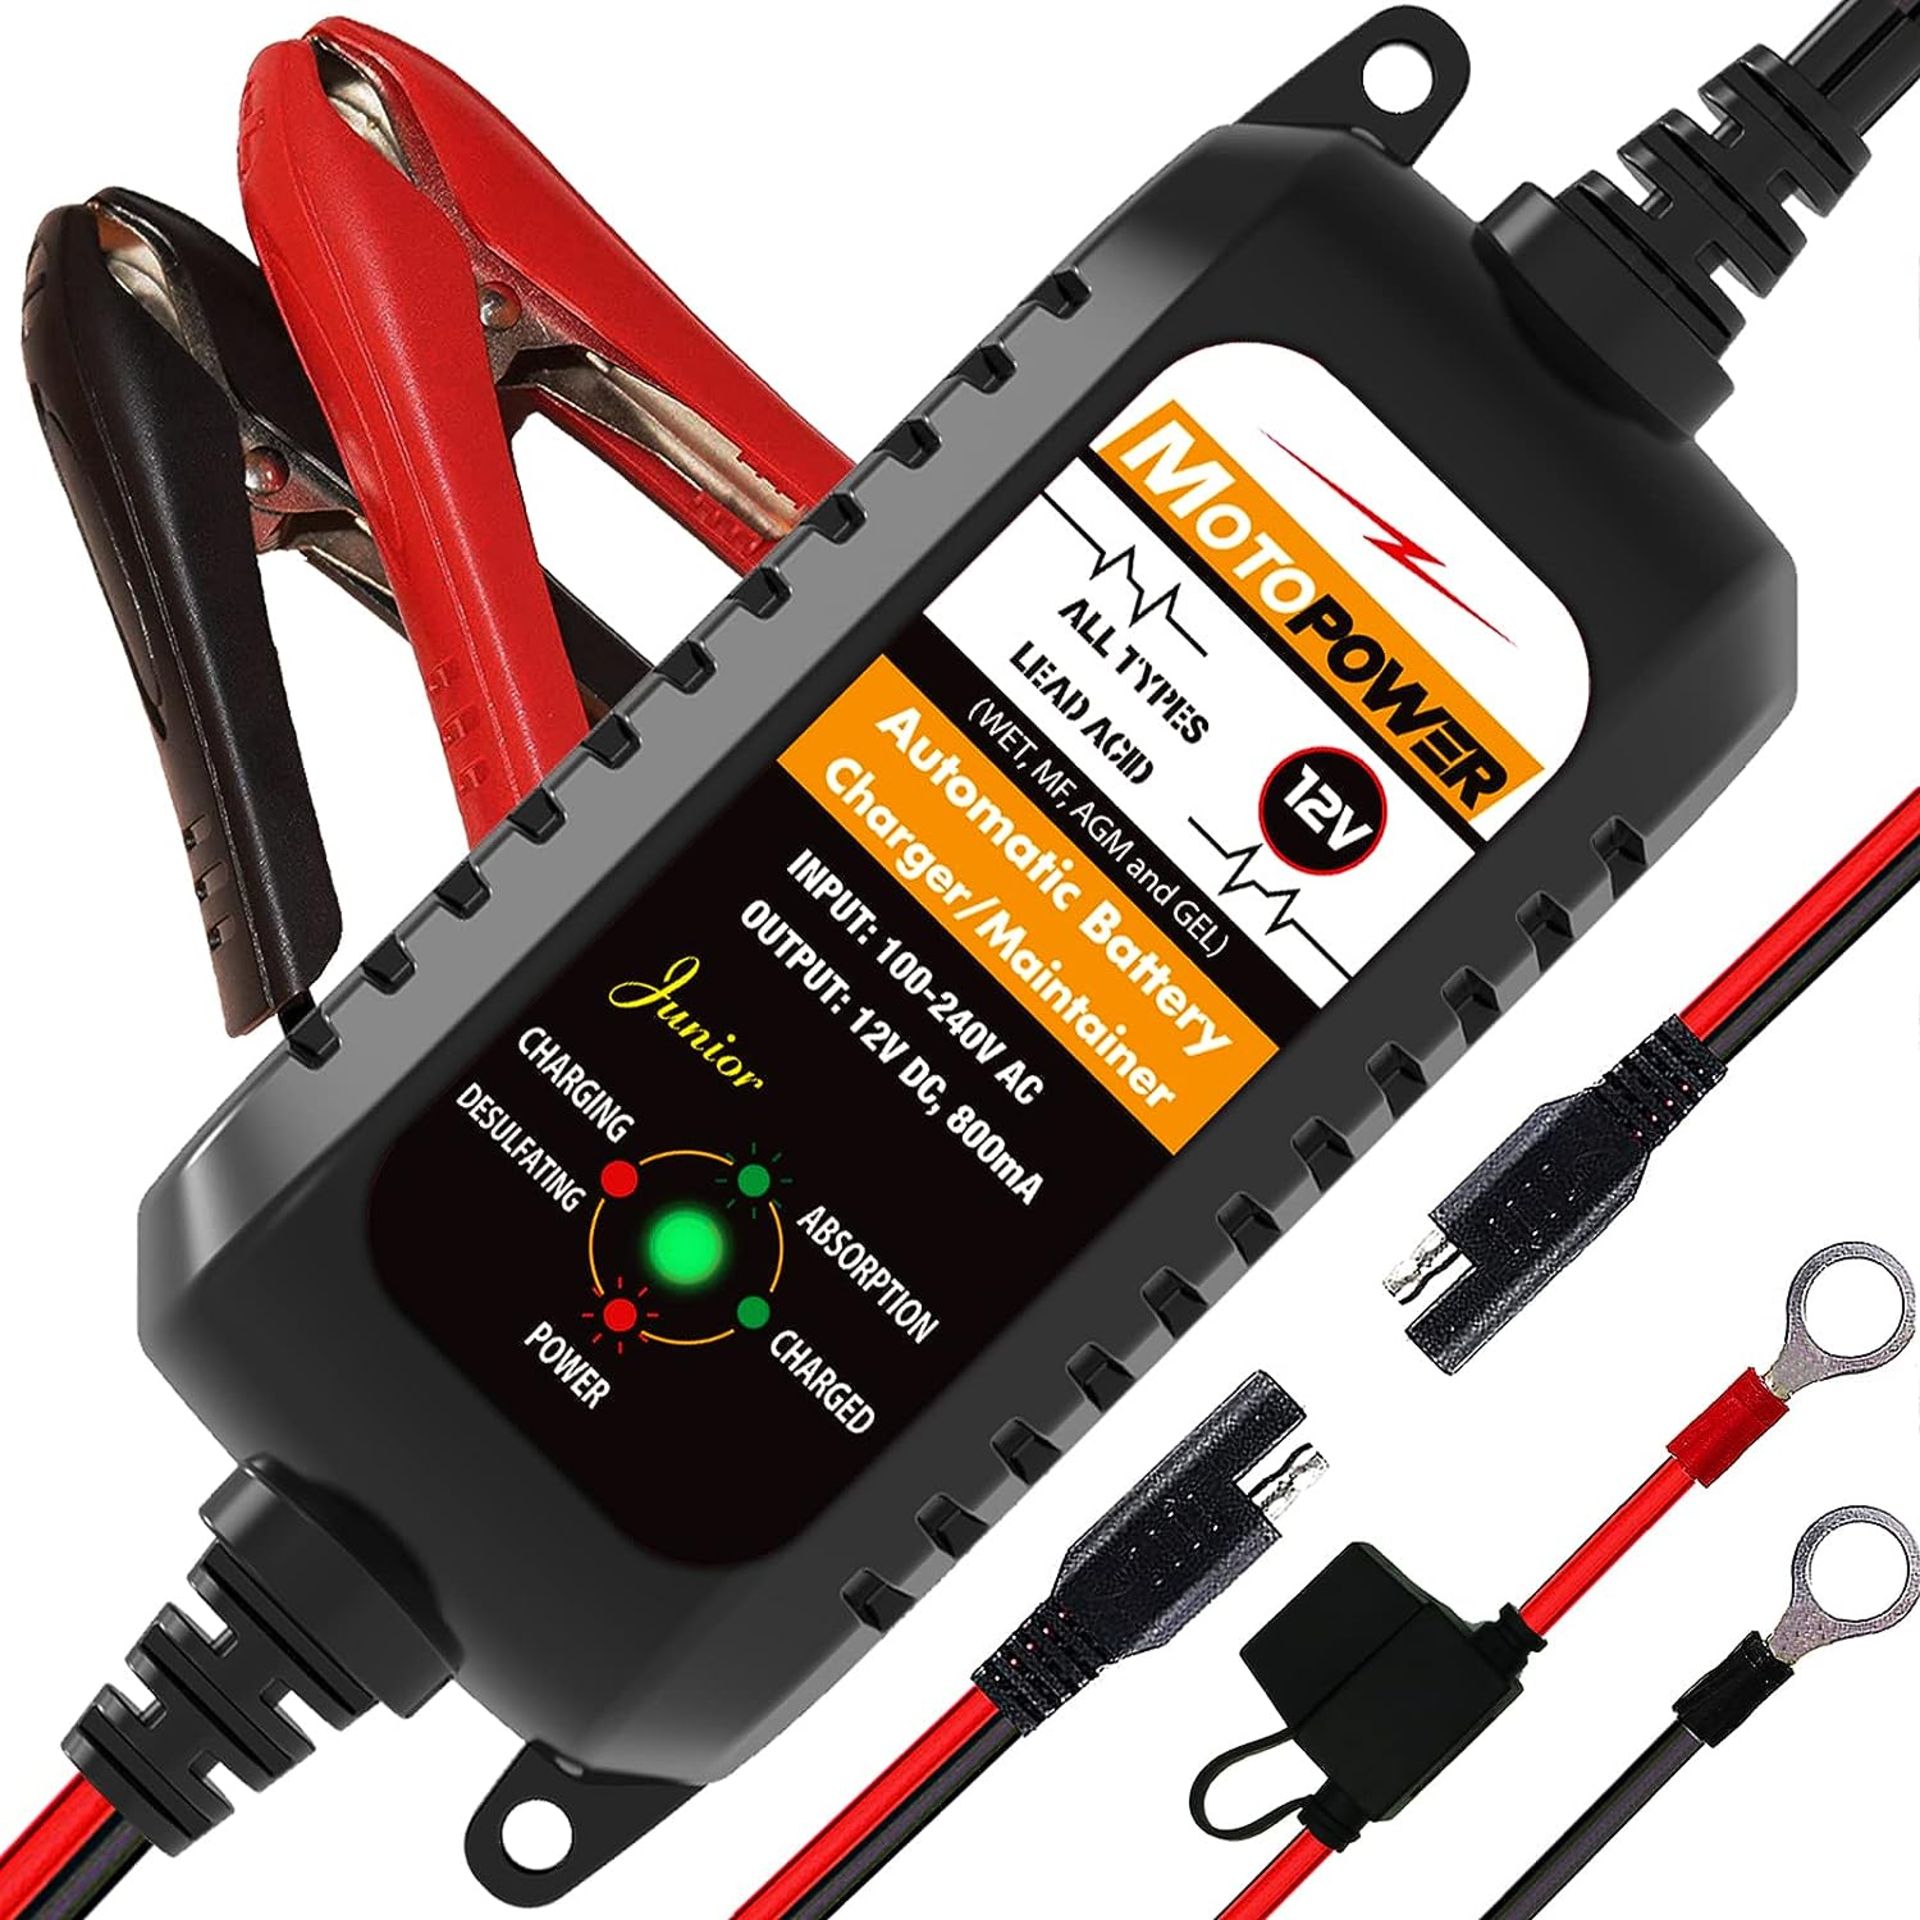 RRP £24.99 MOTOPOWER MP00205A 12V 800mA Fully Automatic Battery Charger/Maintainer - UK Plug